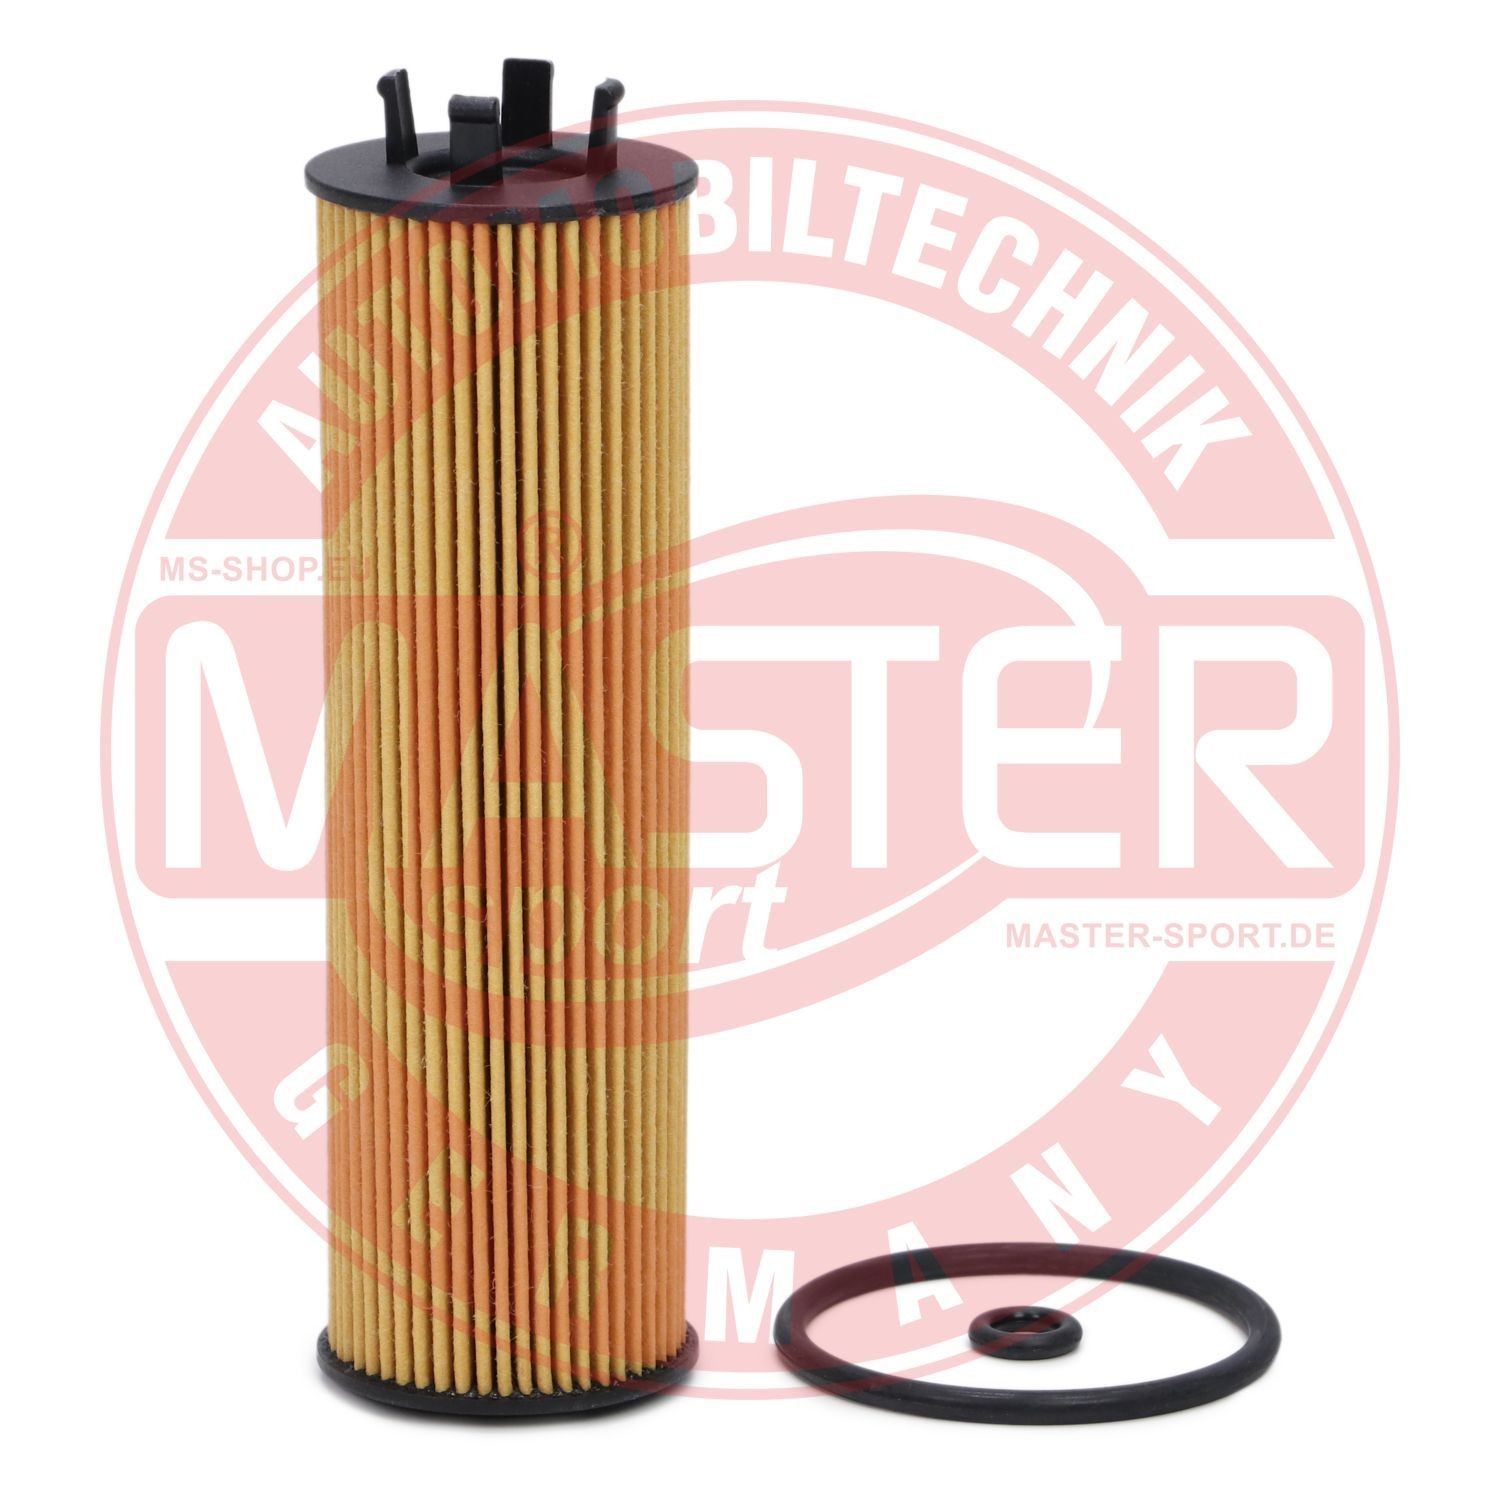 MASTER-SPORT 1340DK-OF-PCS-MS Oil filter SEAT experience and price